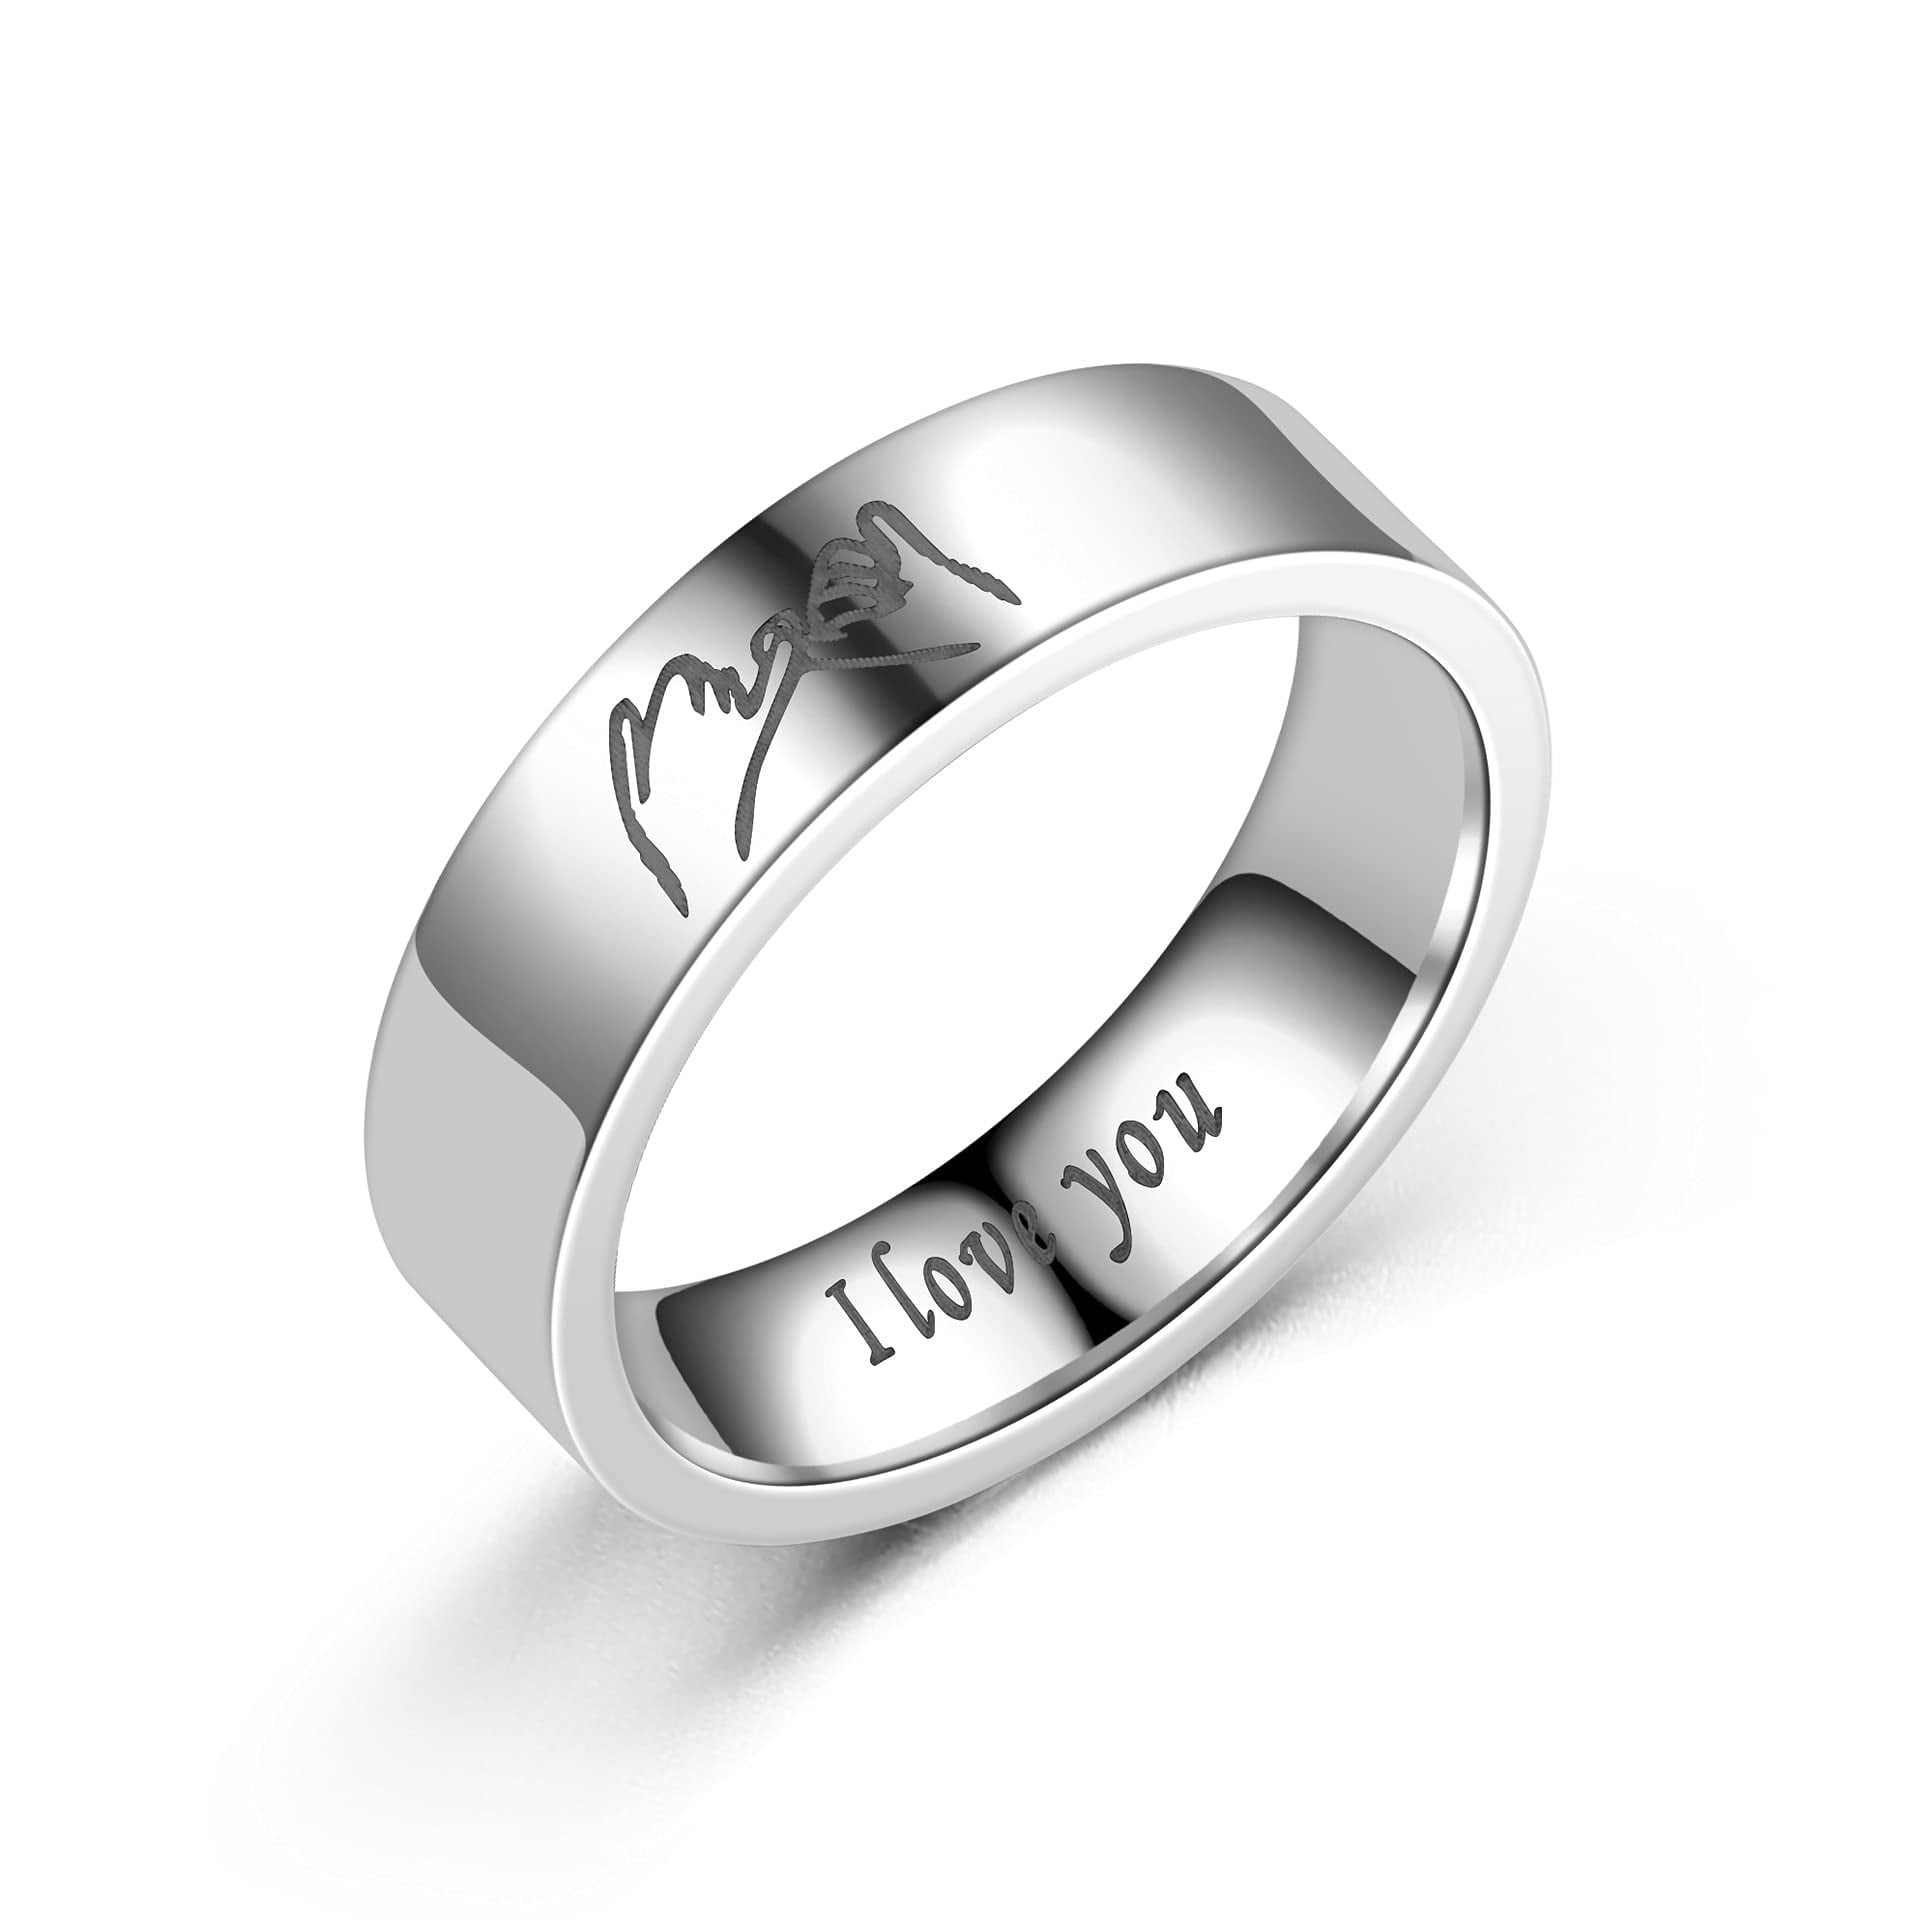 You and Me Ring Metal